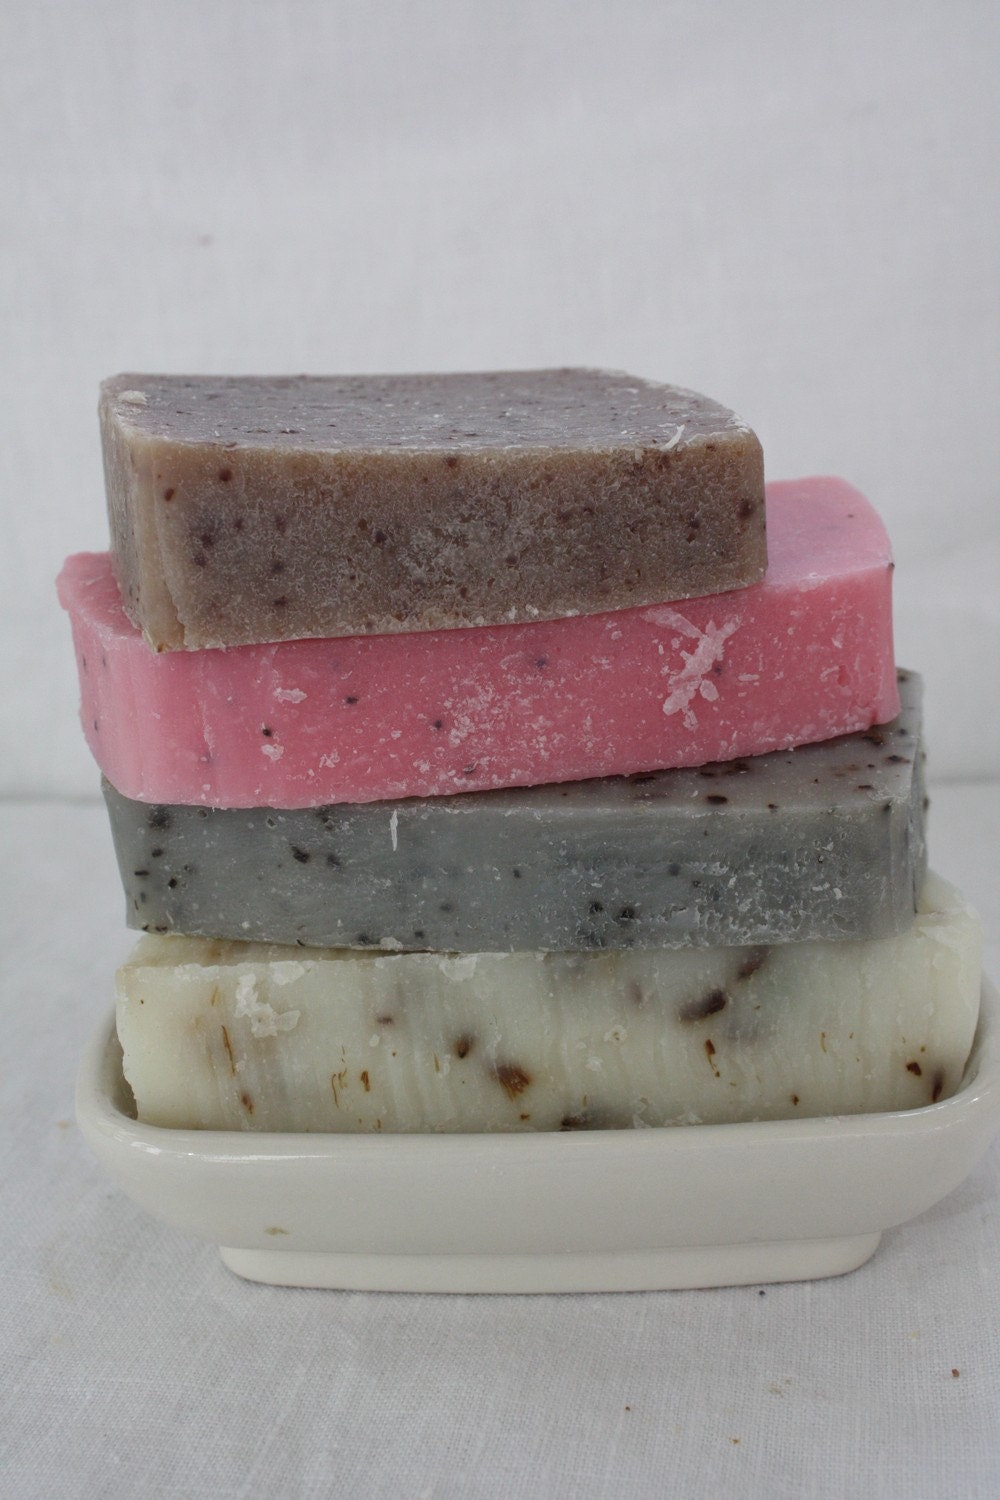 Choose your Favorite 4 Scents - Homemade Natural Soap